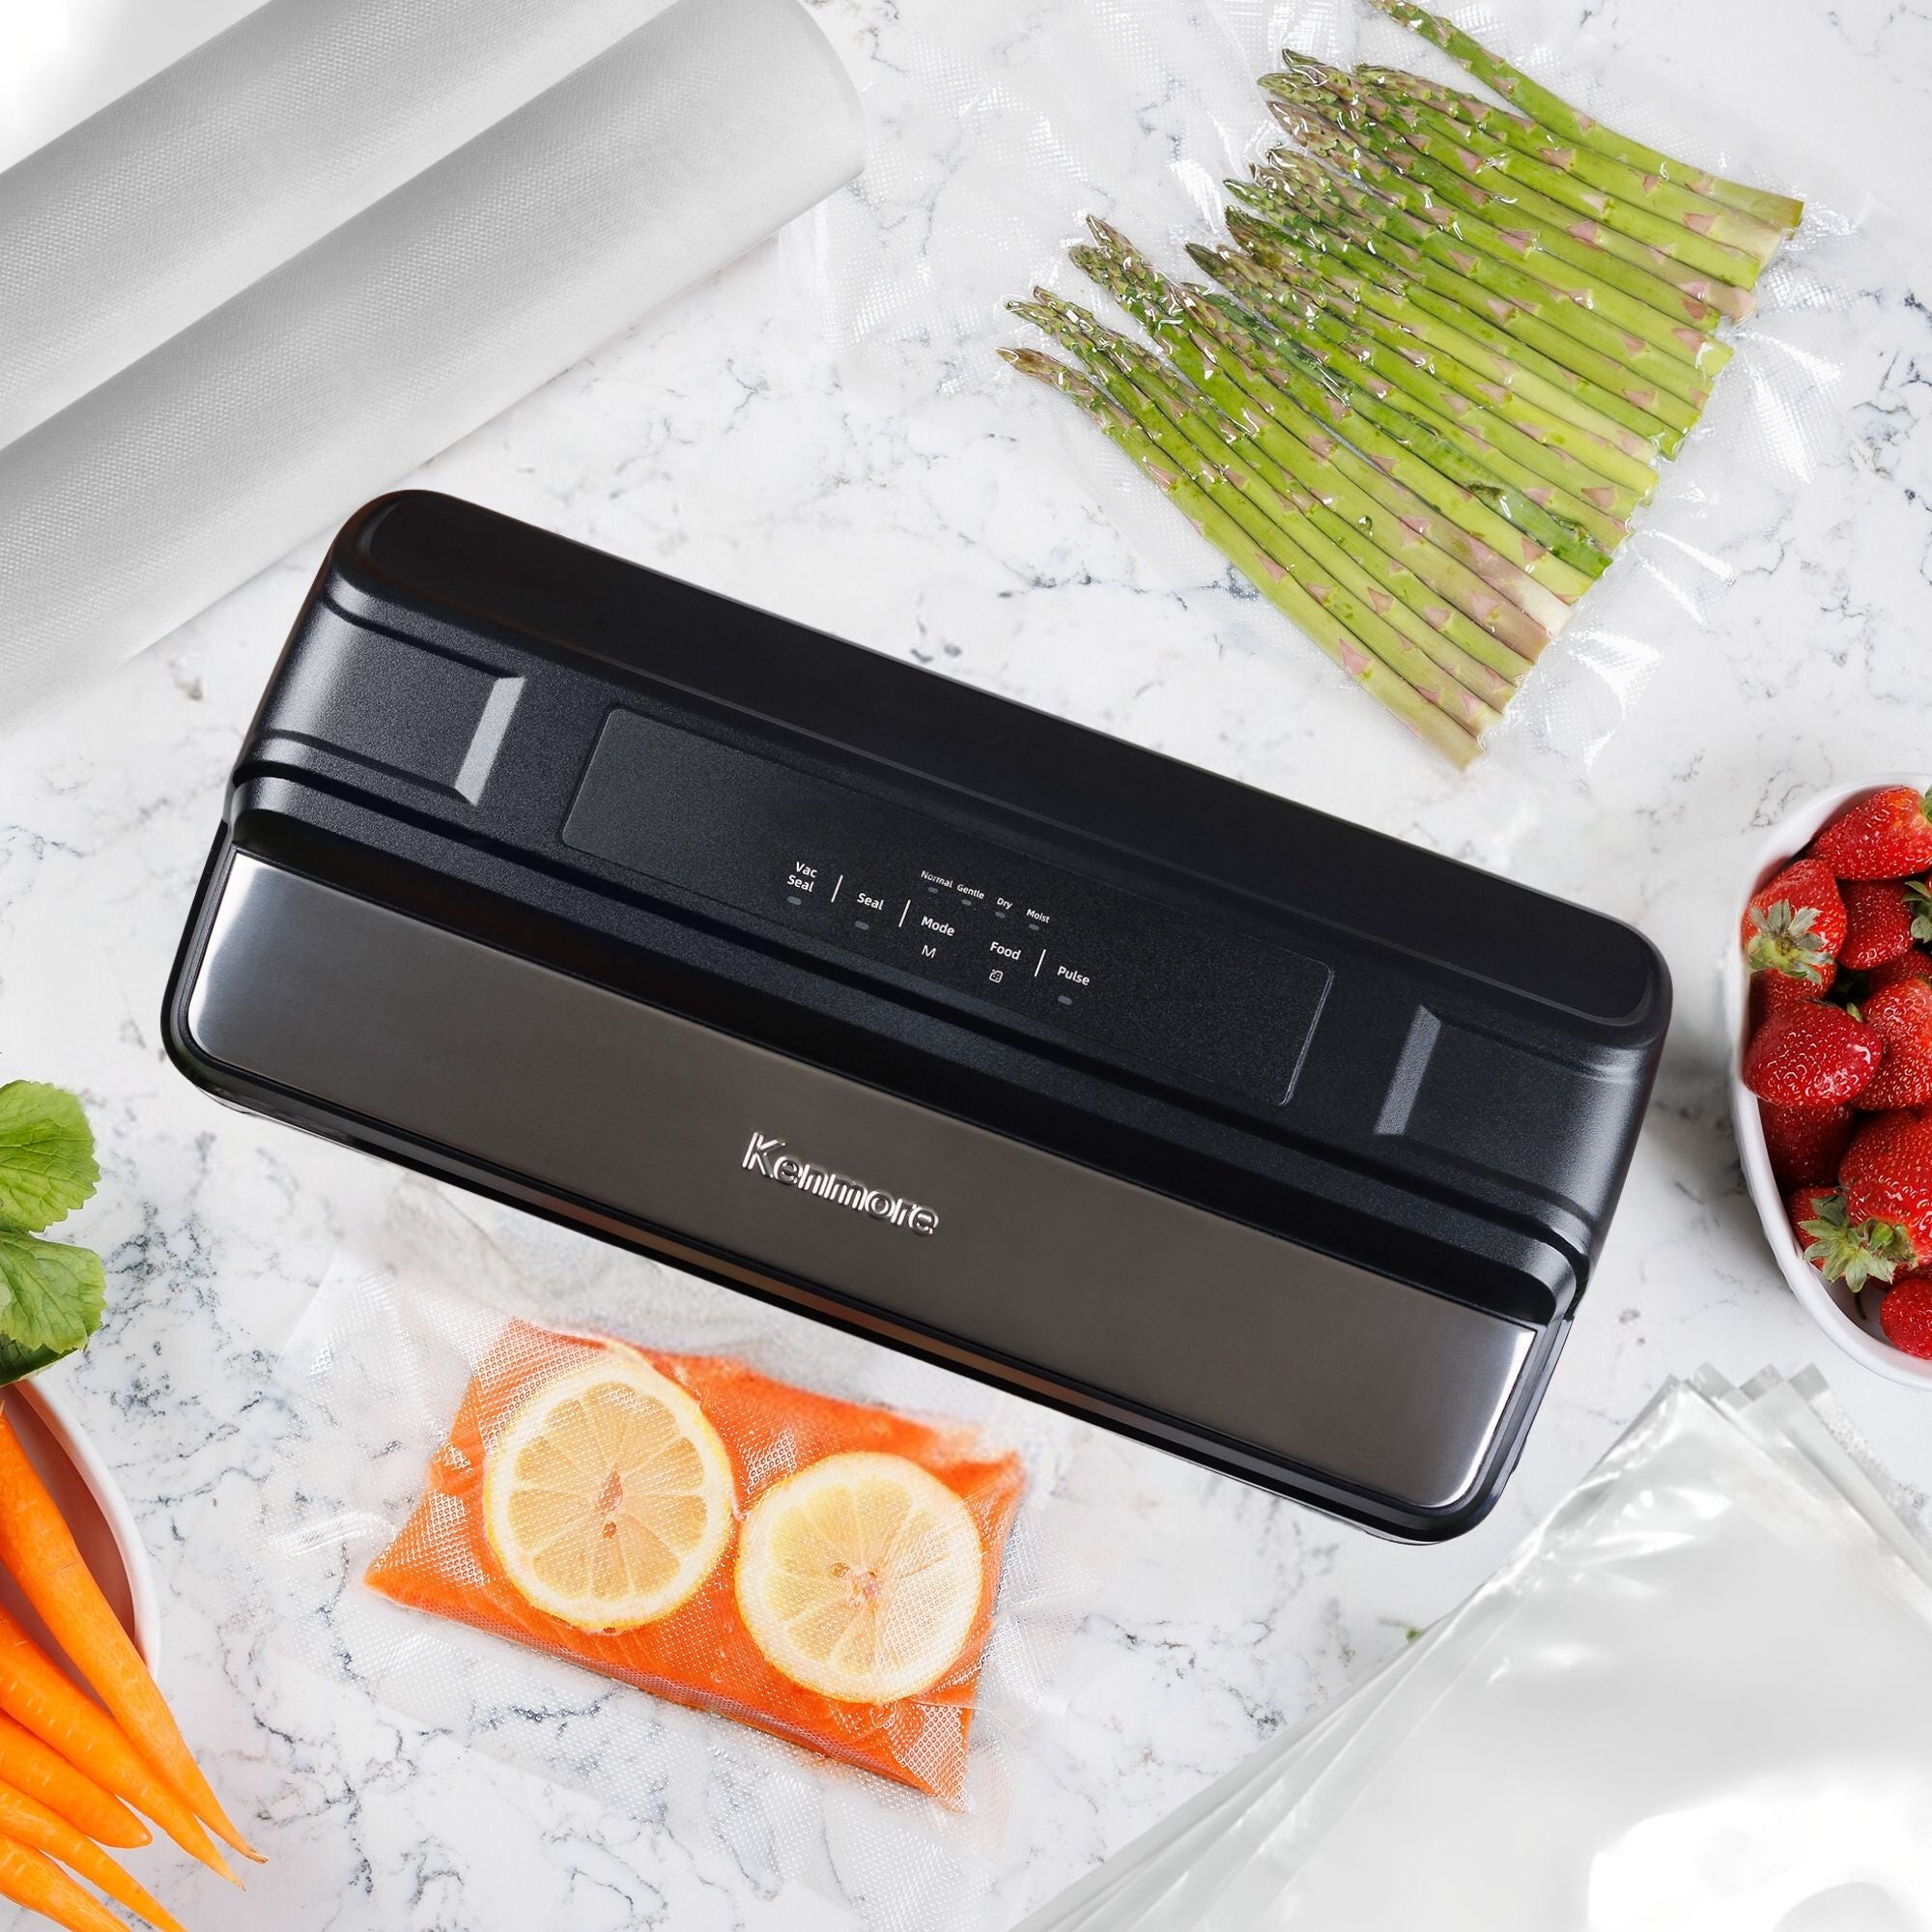 Kenmore vacuum sealer on a white and gray marble surface with a bag containing salmon and lemon slices being sealed and a sealed bag of asparagus, fresh strawberries and carrots, and vacuum bags and bag rolls arranged around it